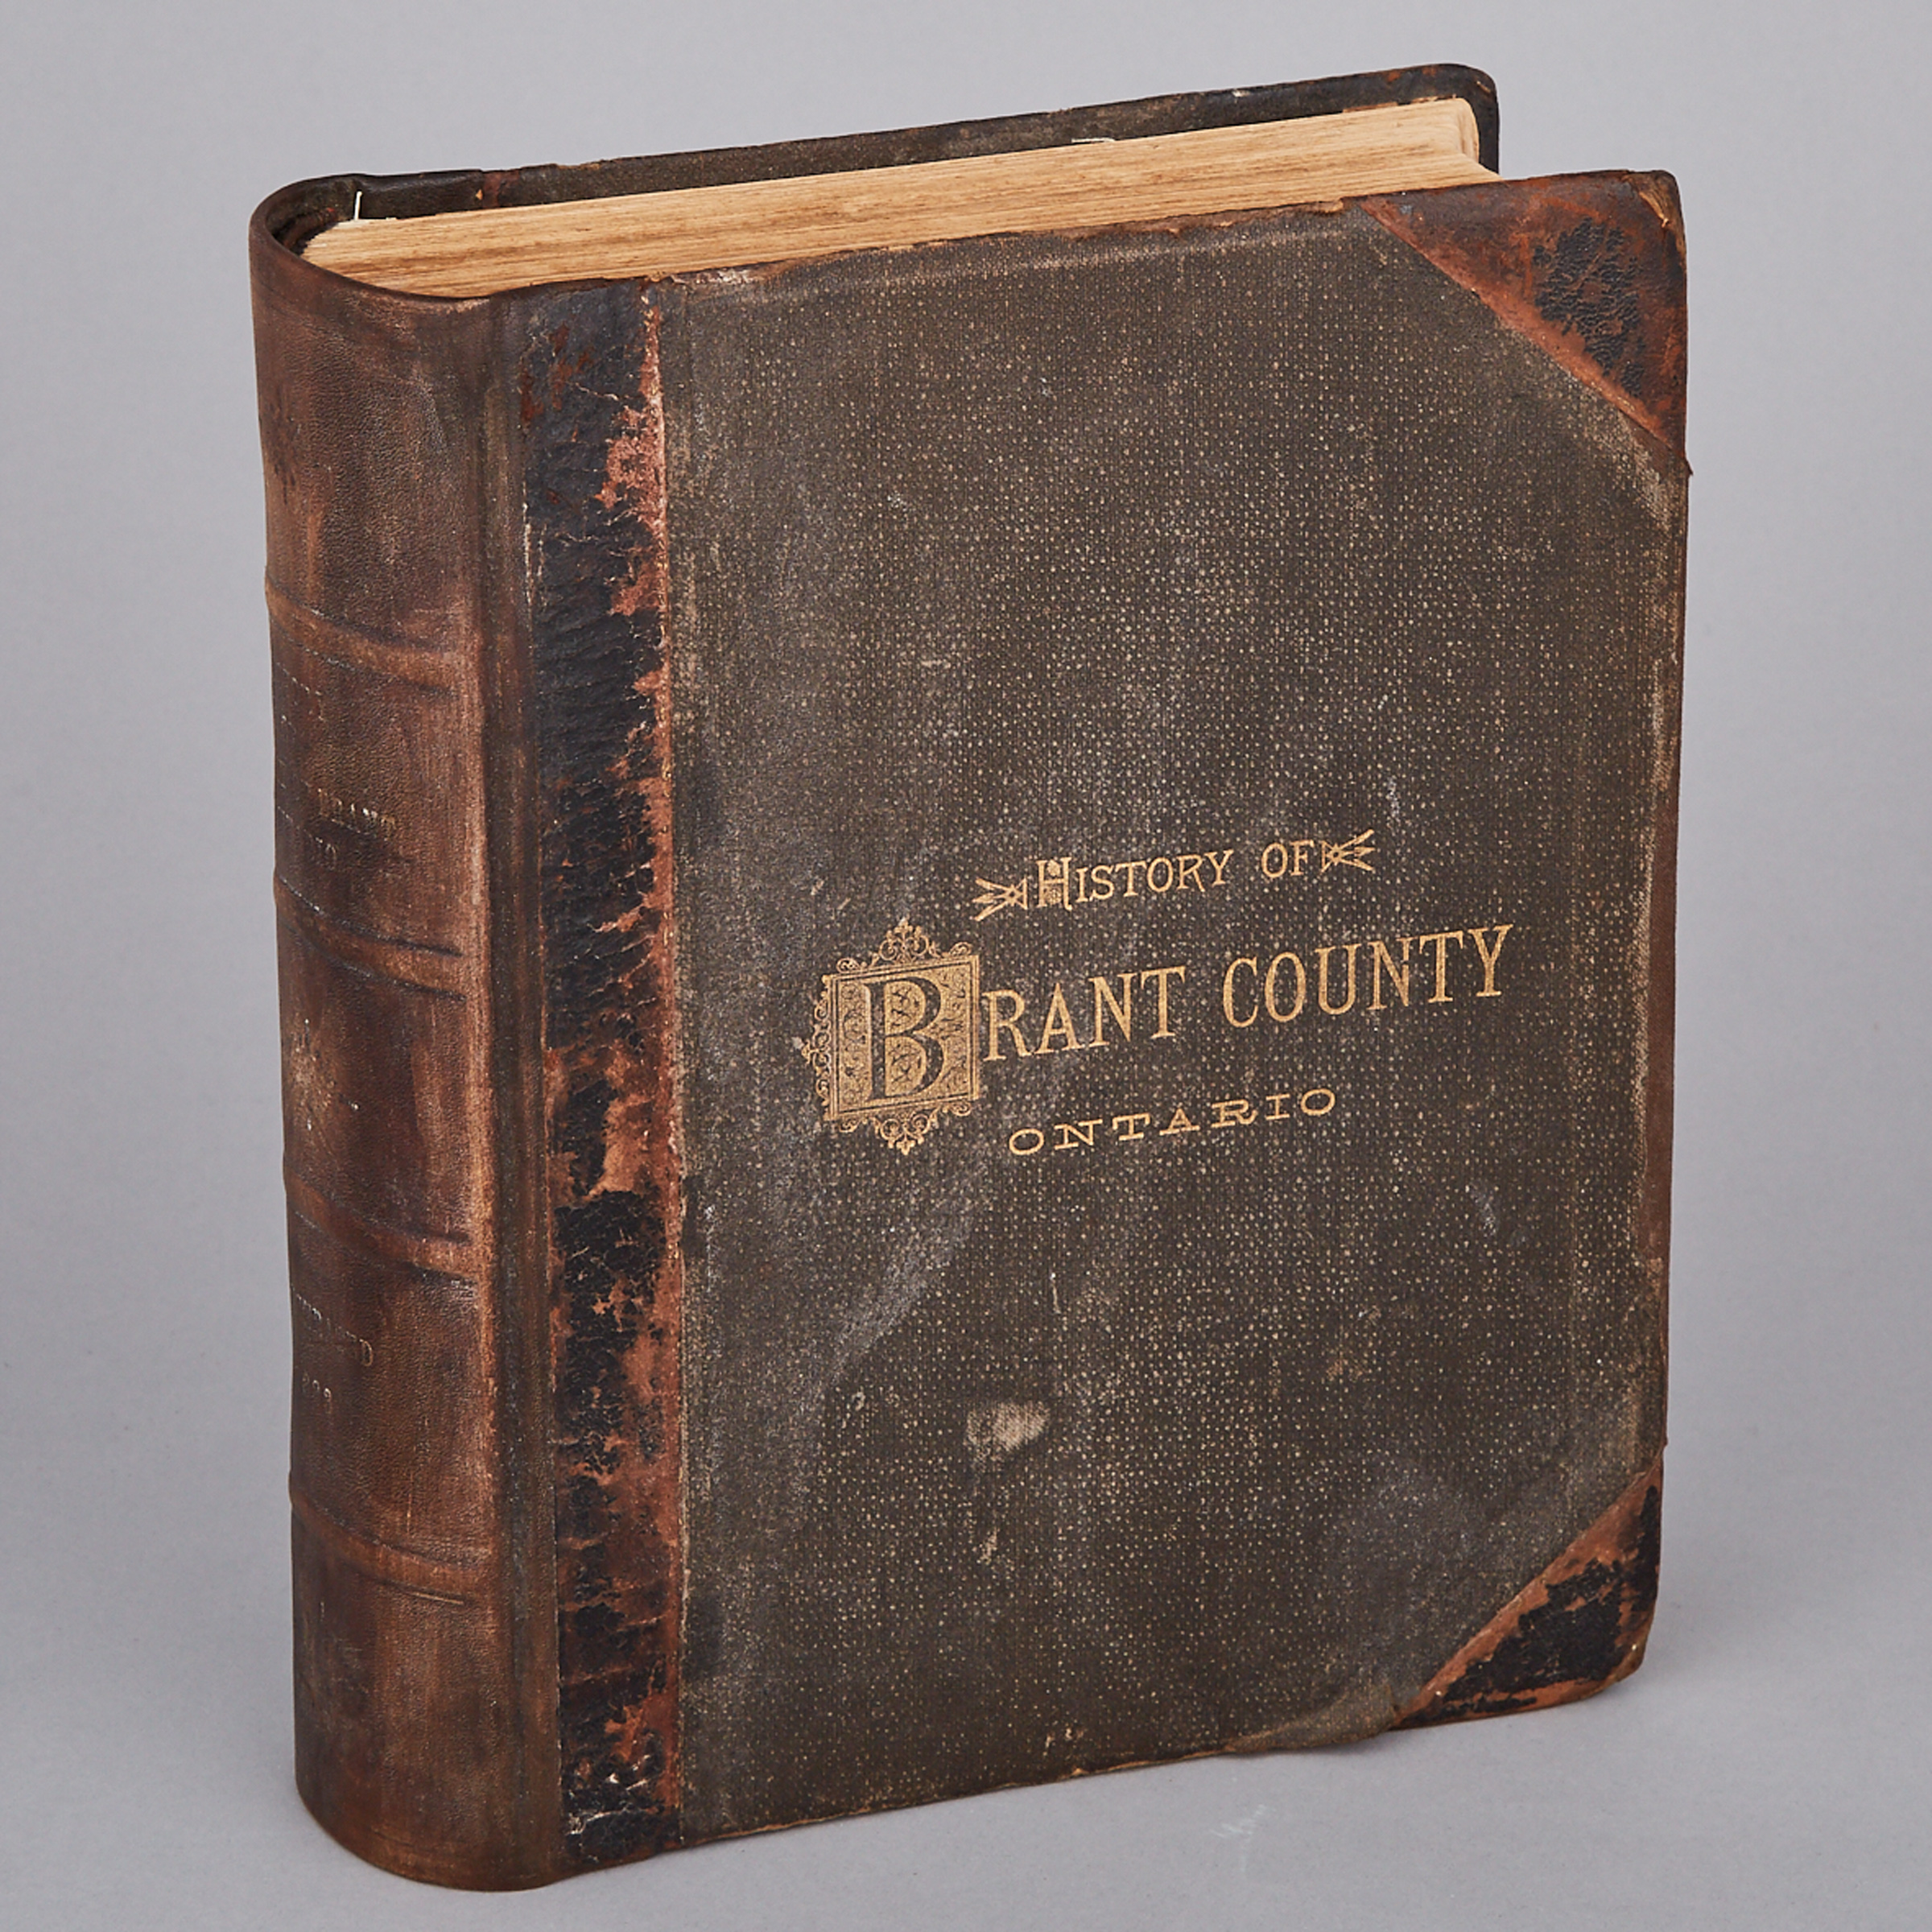 The History of the County of Brant, Ontario, 1883